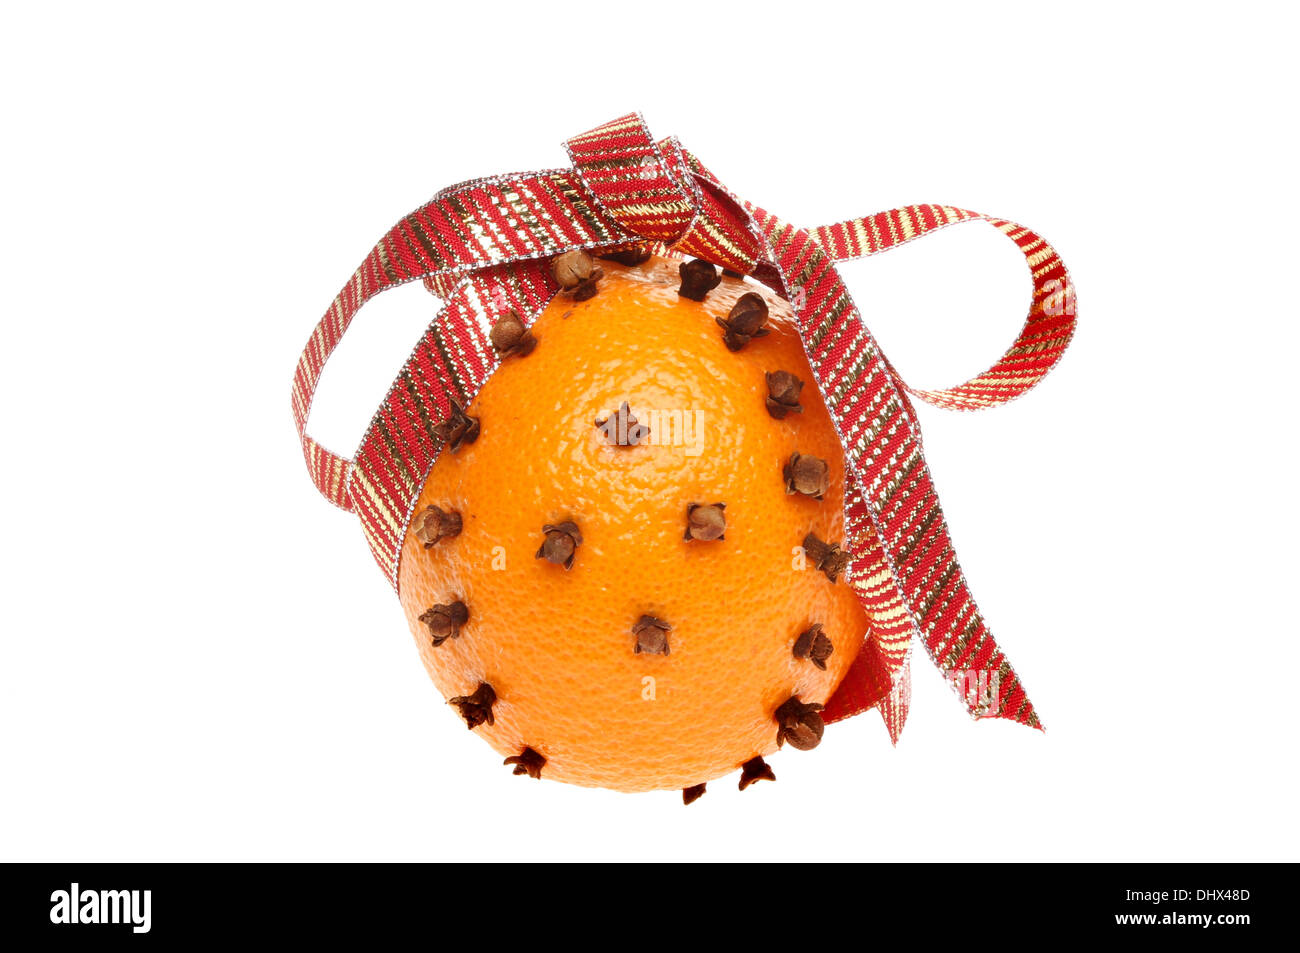 Orange decorated with cloves and a ribbon isolated against white Stock Photo